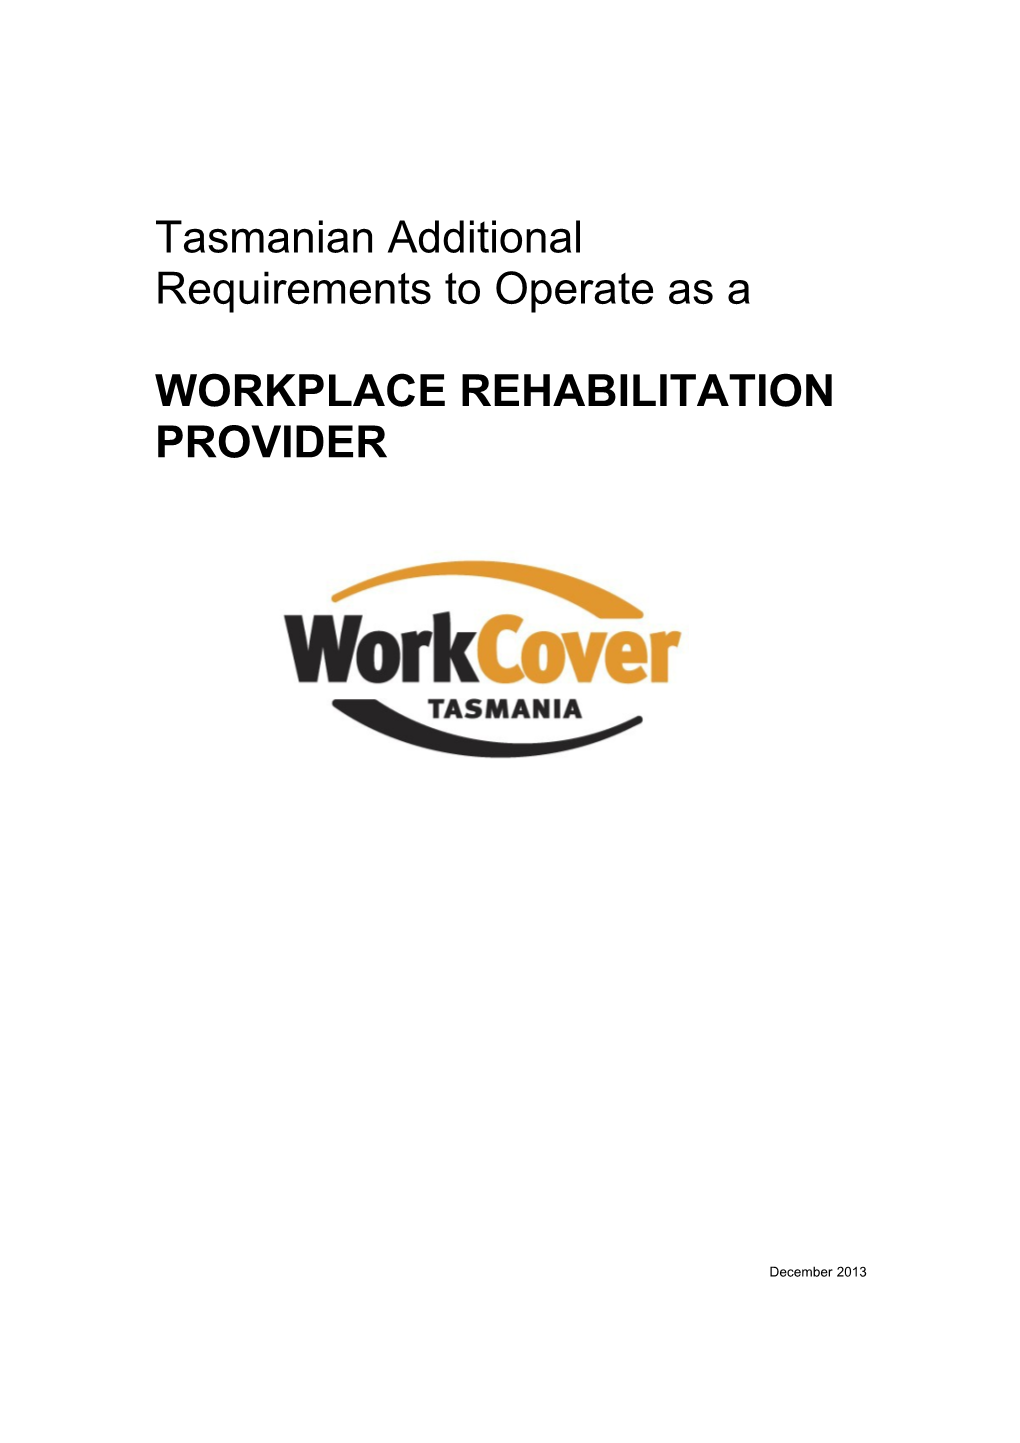 Tasmanian Additional Requirements to Operate As a Workplace Rehabilitation Provider